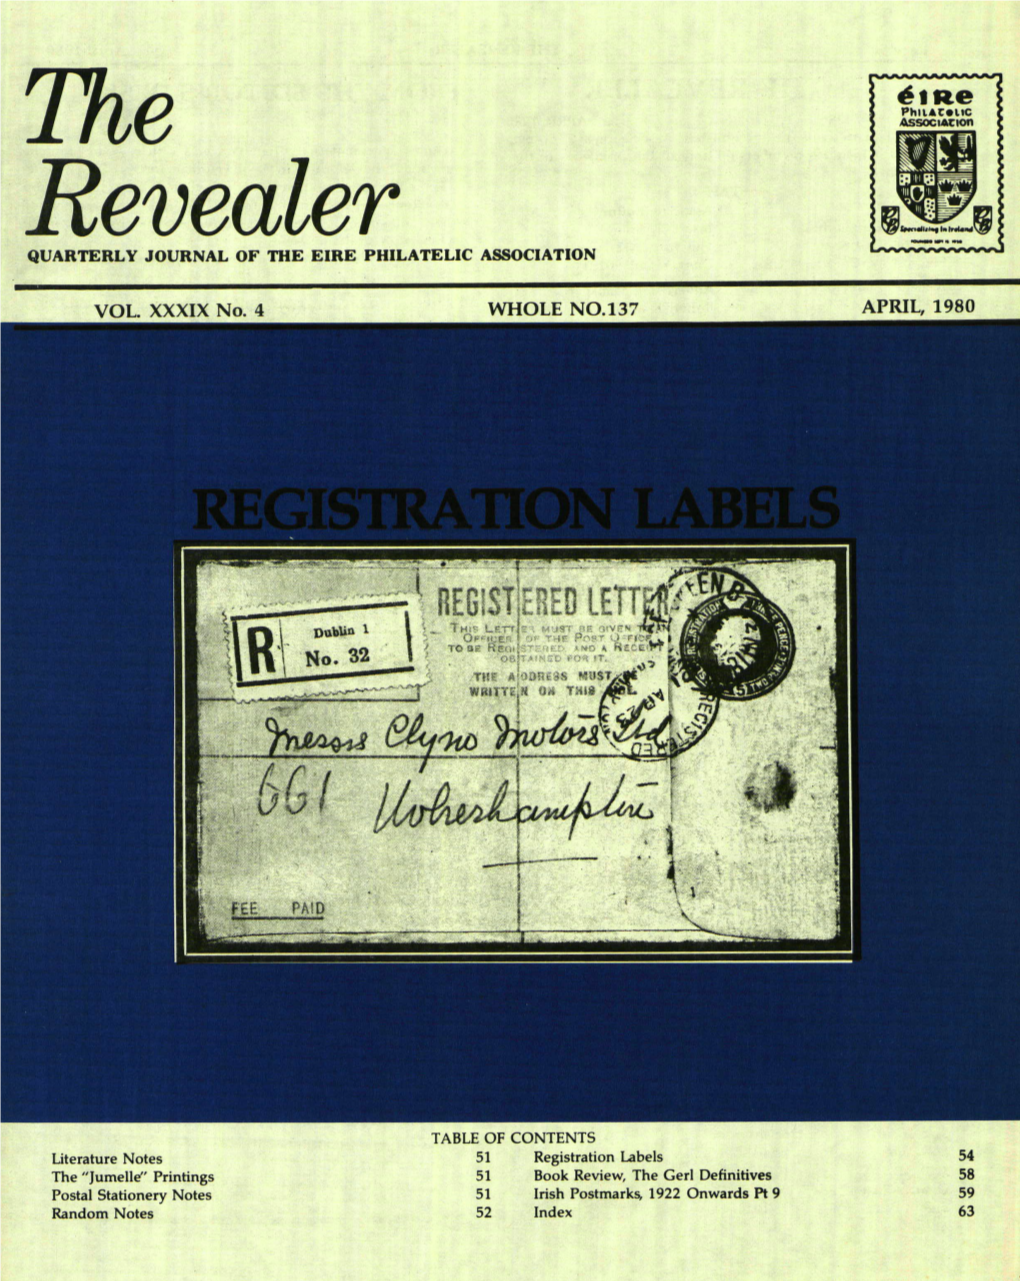 Irish Postmarks, 1922 Onwards Pt 9 59 Random ~Otes 52 Index 63 Page 50 the REVEALER April 1980 the REVEALER from the EDITOR's DESK WHOLE NO